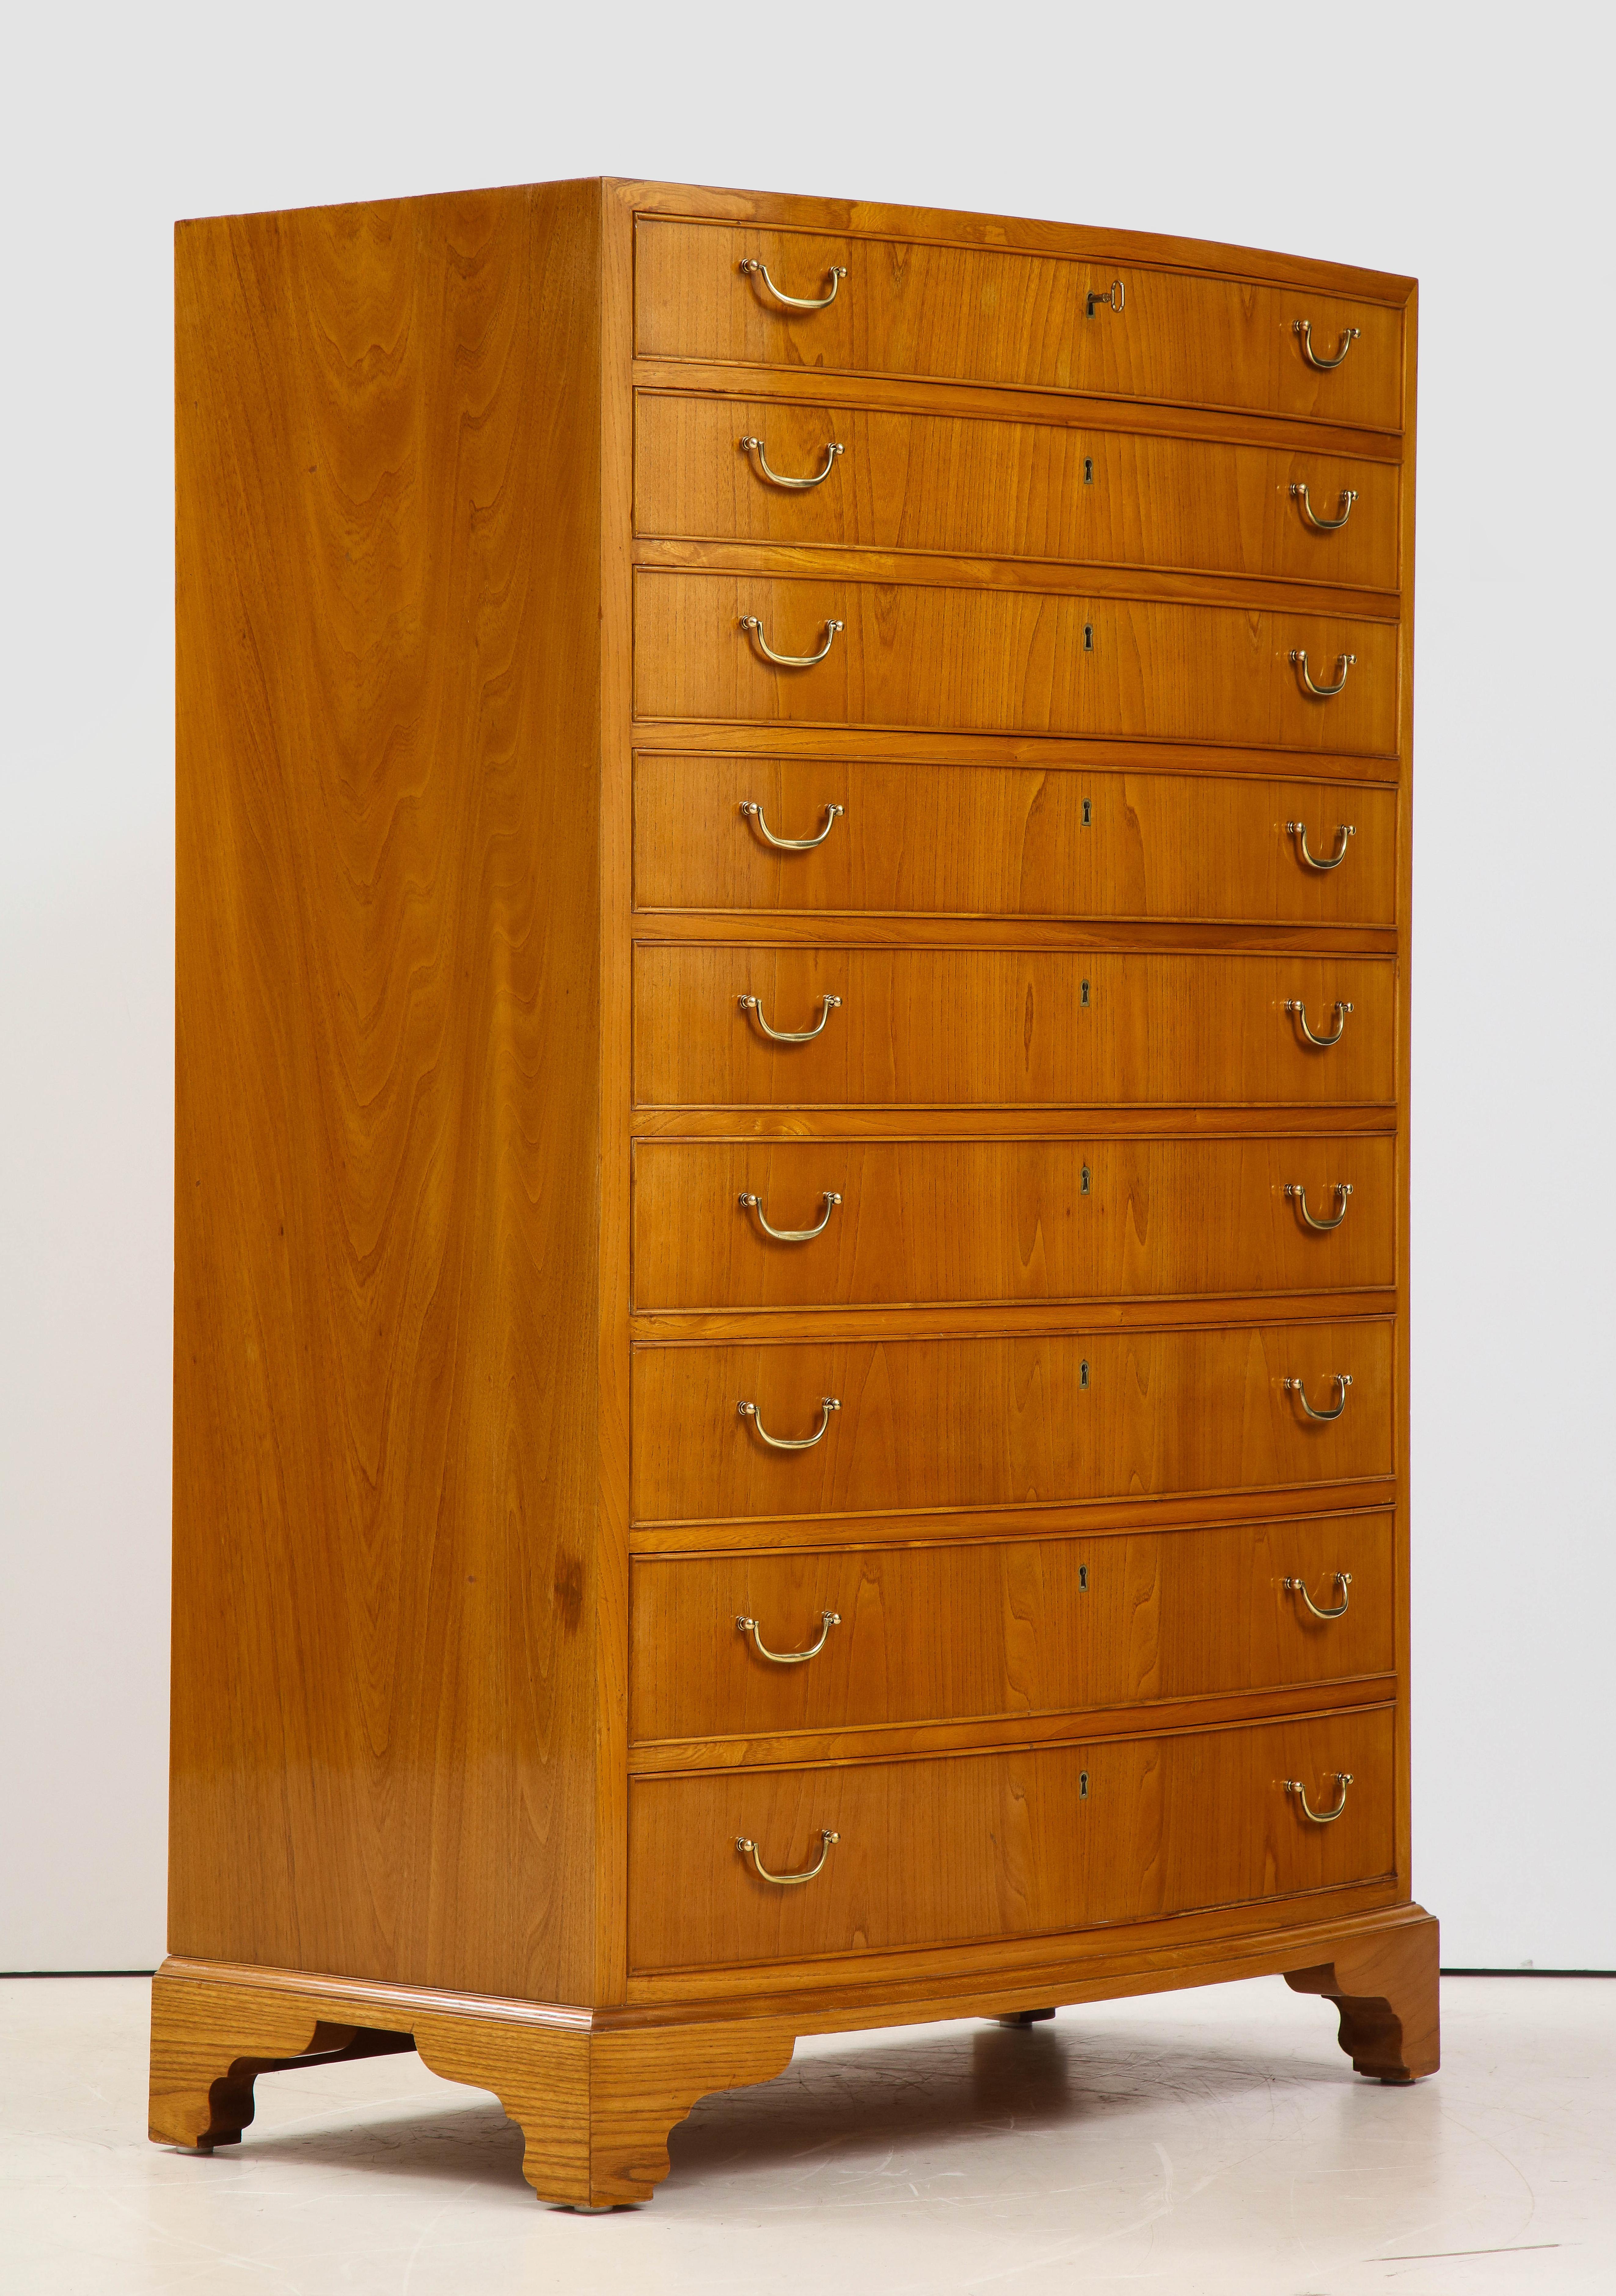 A Danish modern elmwood tall bow-front chest of drawers by Ole Wanscher, circa 1950s with nine bow front graduated drawers raised on scrolled bracket feet.